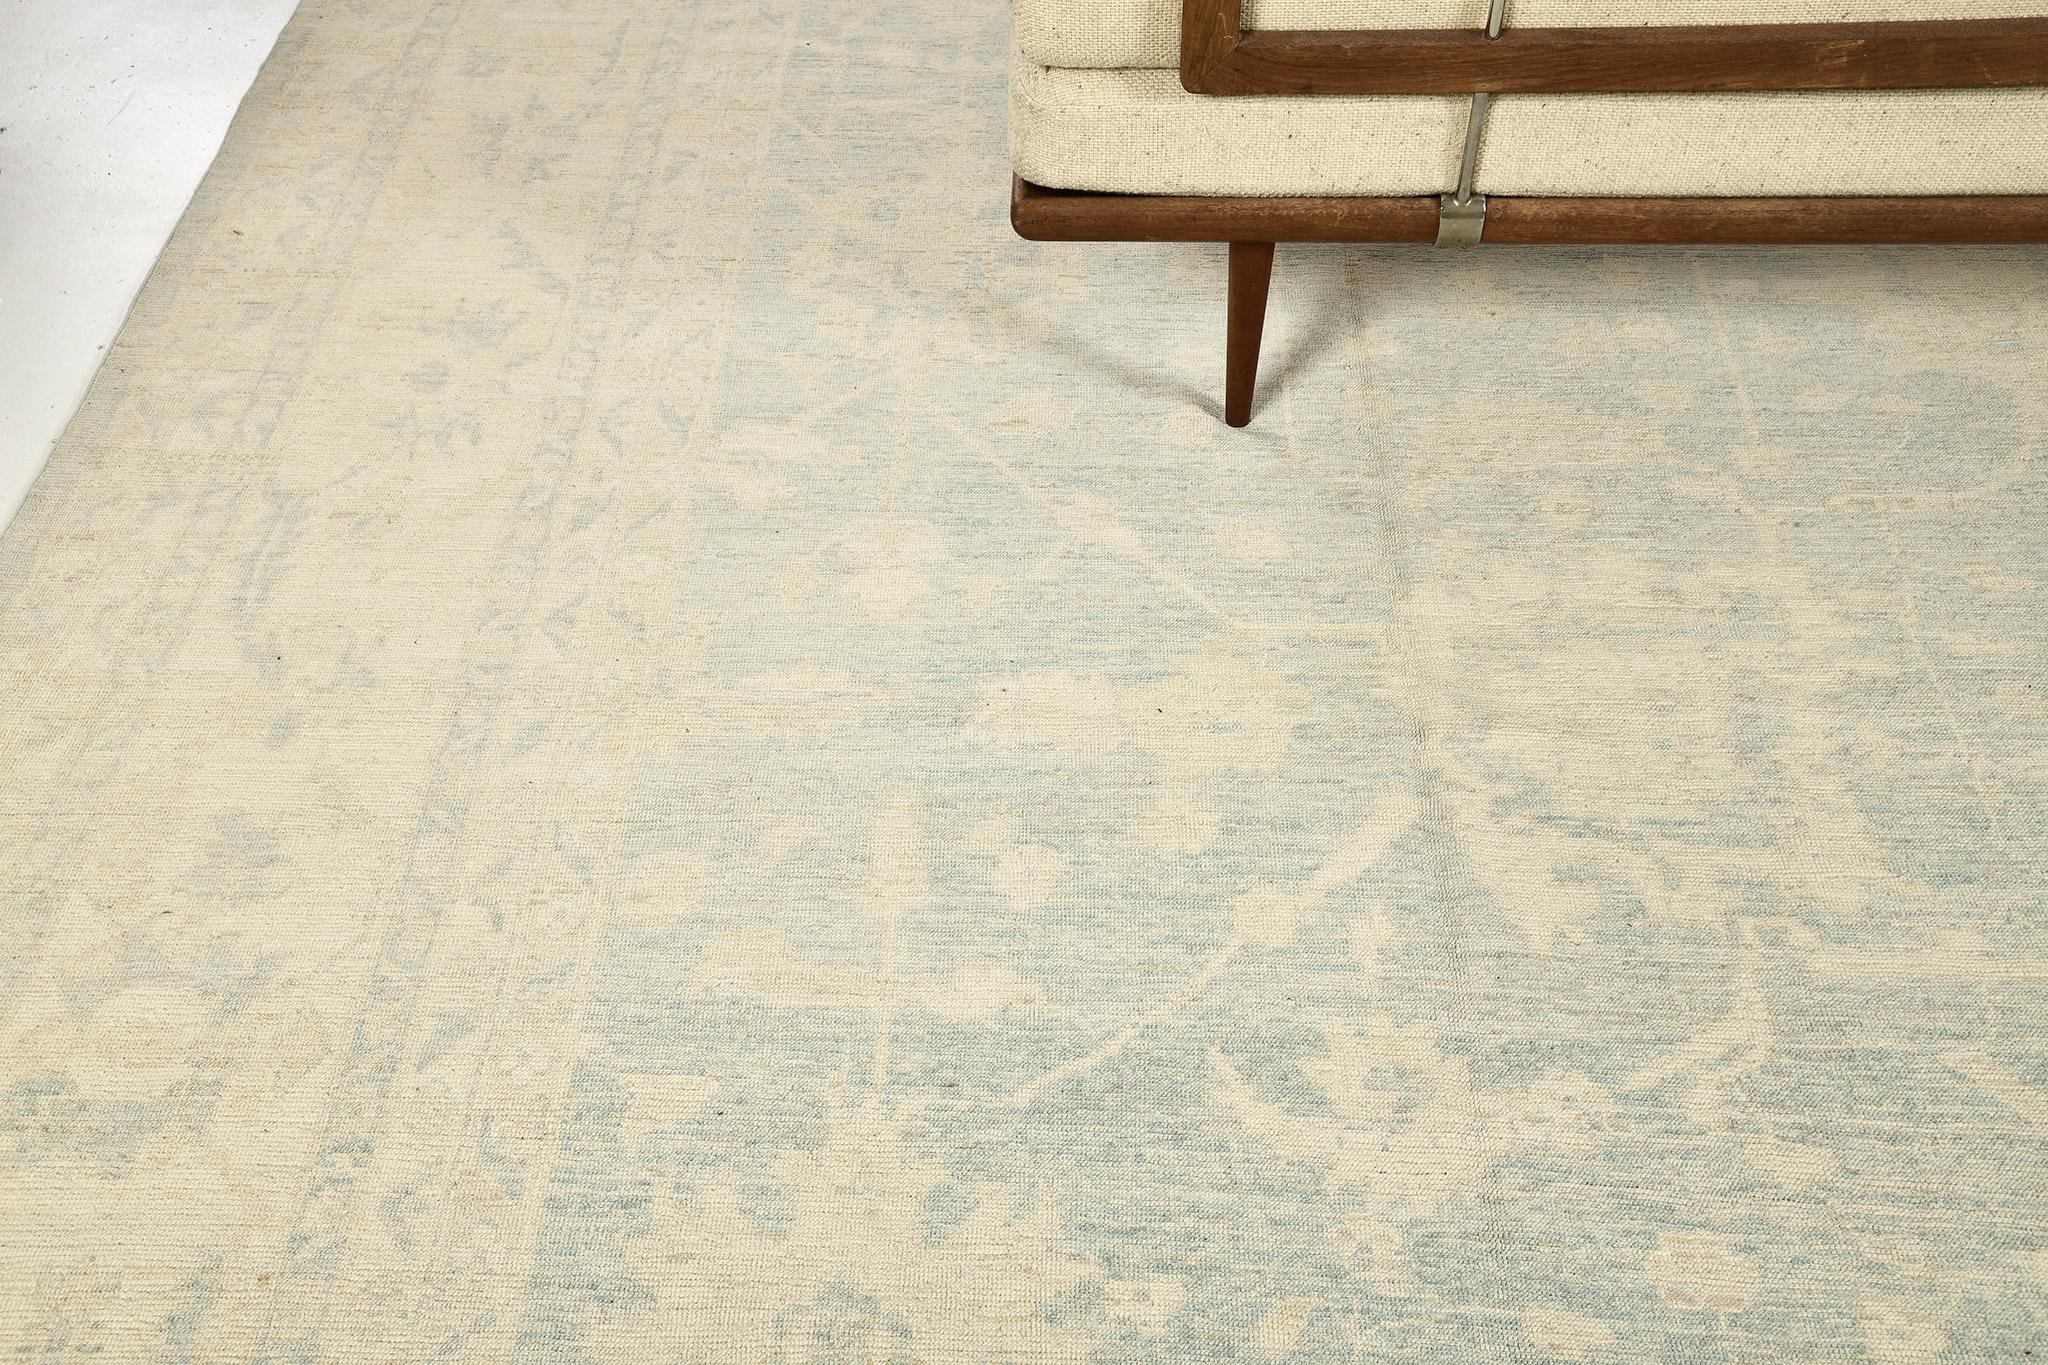 Radiating simplicity through its beauty of a hand spun wool revival of Oushak Rug from Safira Collection. From the lightest ivory to the coolest blue of the florid elements and scrolls. It creates a soulful balance of everything from modern decor to